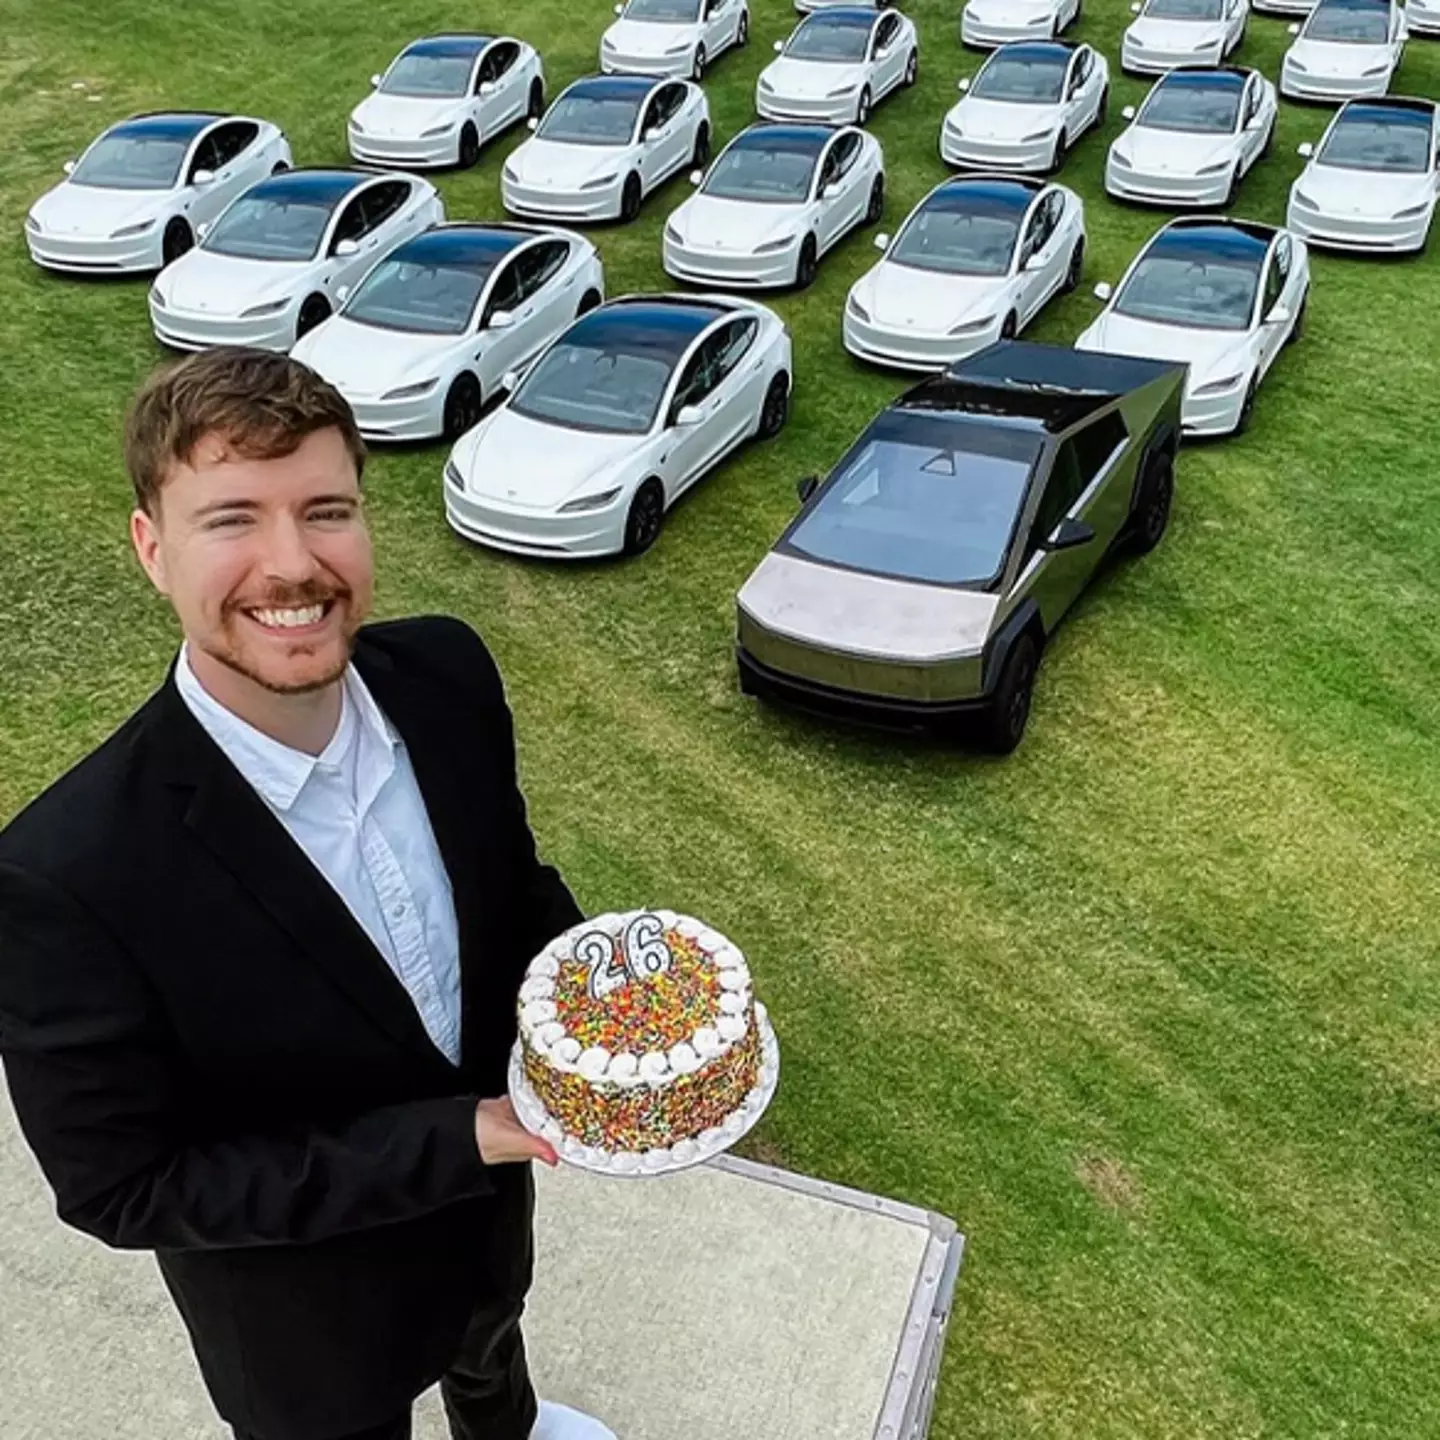 MrBeast is giving away 26 Tesla vehicles in huge 26th birthday giveaway and there's an easy way to enter